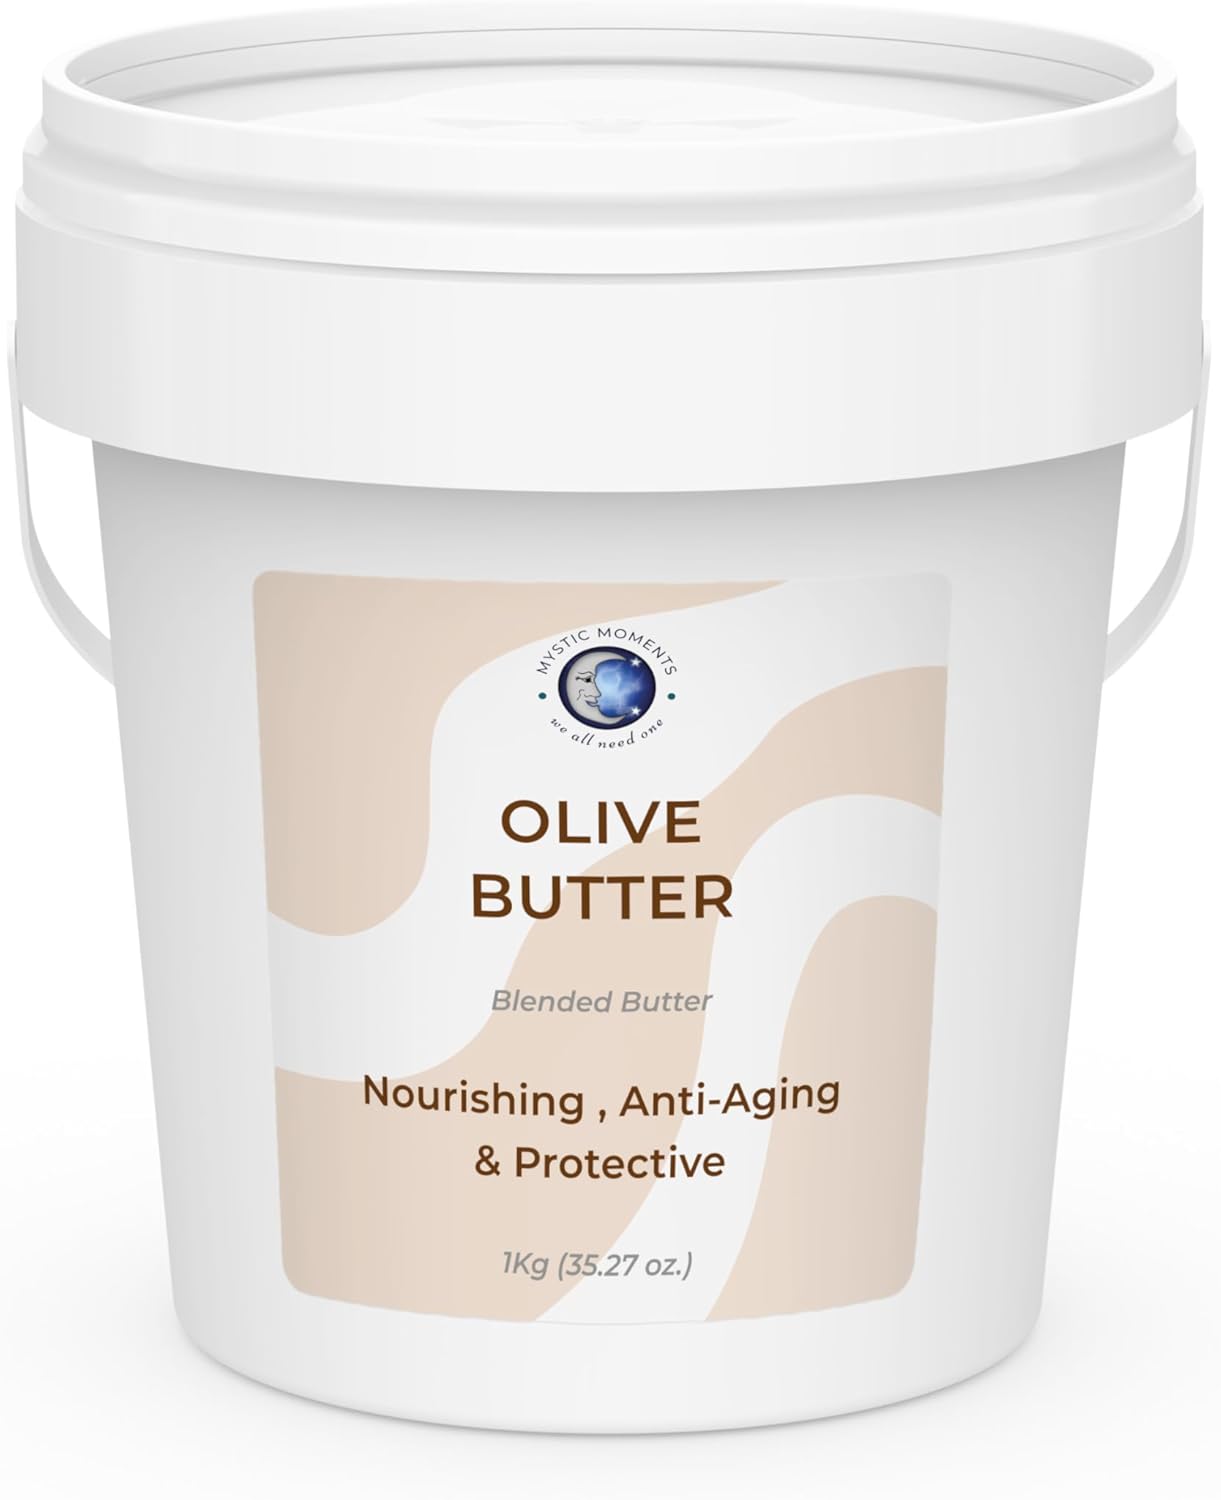 Mystic Moments | Olive Blended Butter 1Kg - 100% Natural Cosmetic Butters Vegan GMO Free